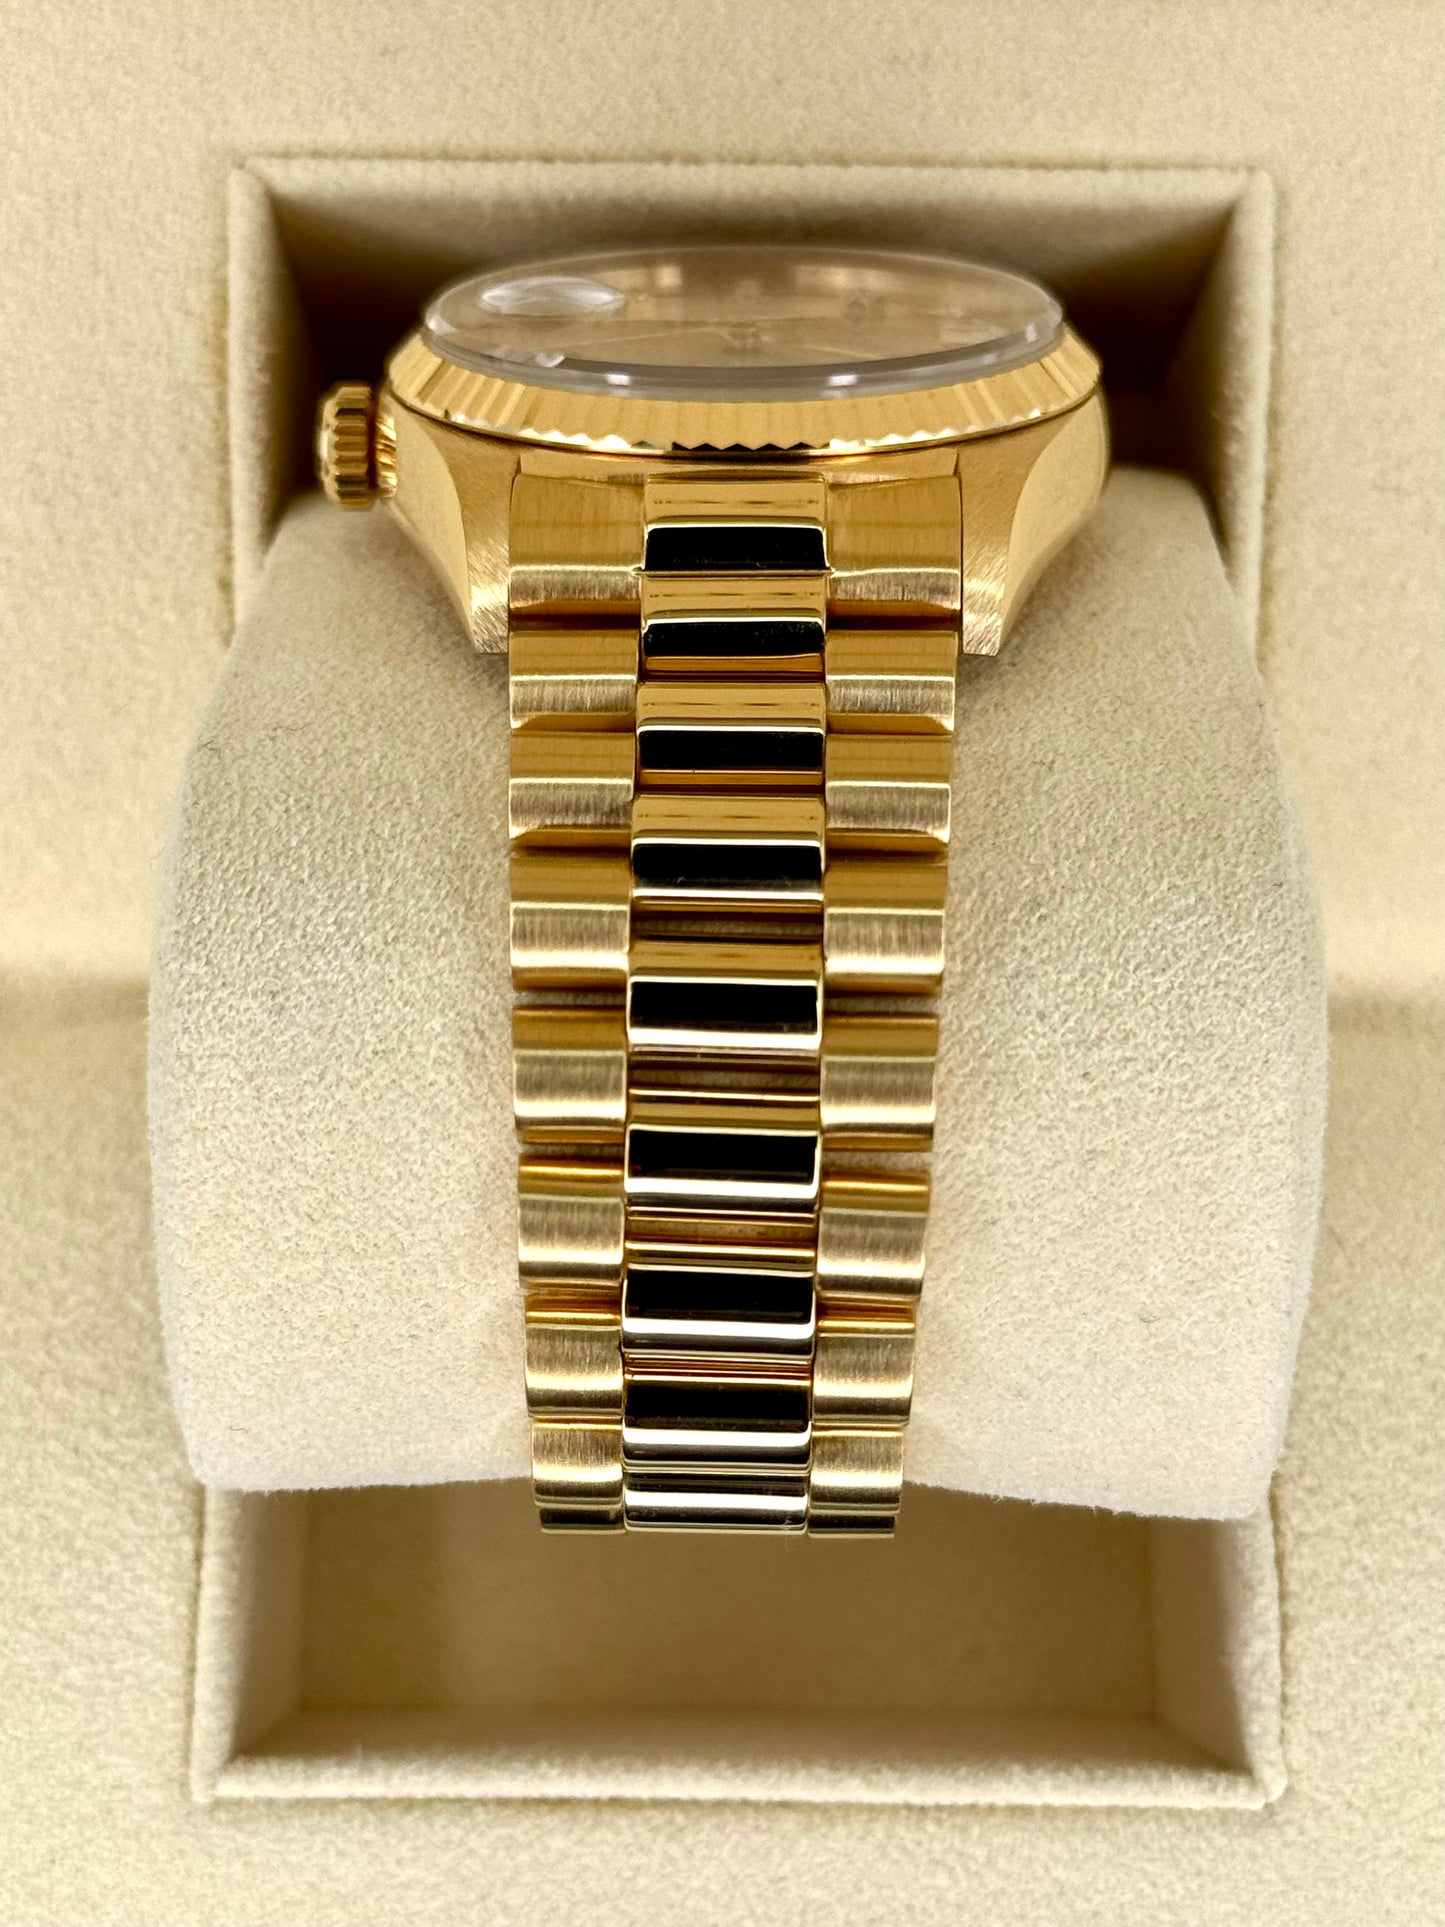 1987 Rolex Day-Date 36mm 18038 Presidential Champagne Diamond Dial